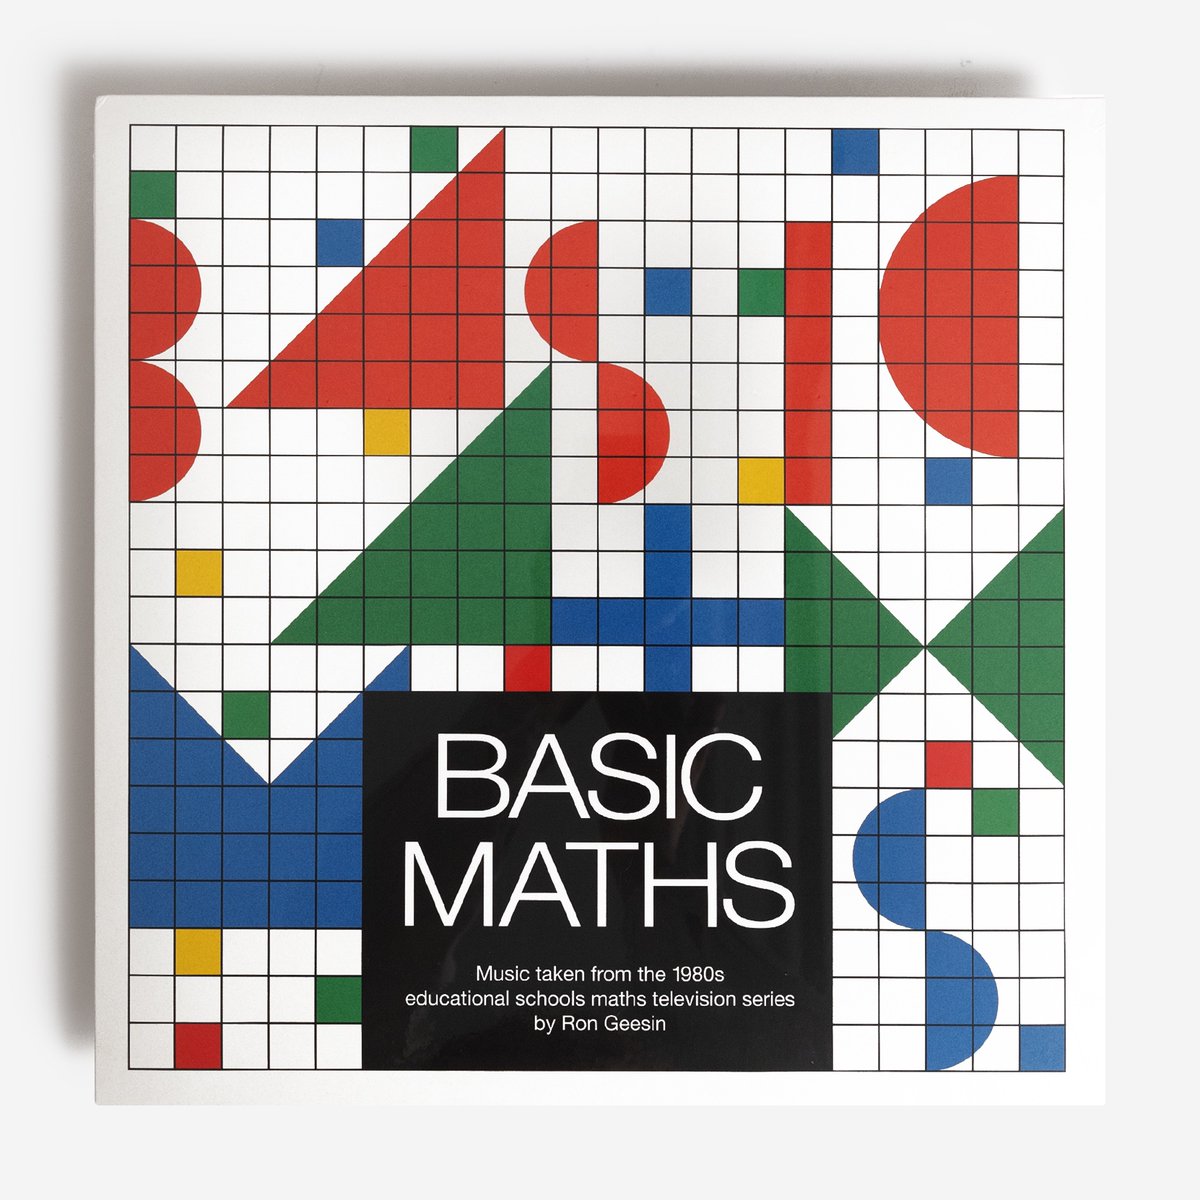 Ron Geesin's anarchic score for Central TV's 1980 educational show 'Basic Maths', where he represents mathematical theories via proto techno experiments, out-mode jazz noodling, Radiophonic shenanigans - it has it all

bit.ly/4aANZsl